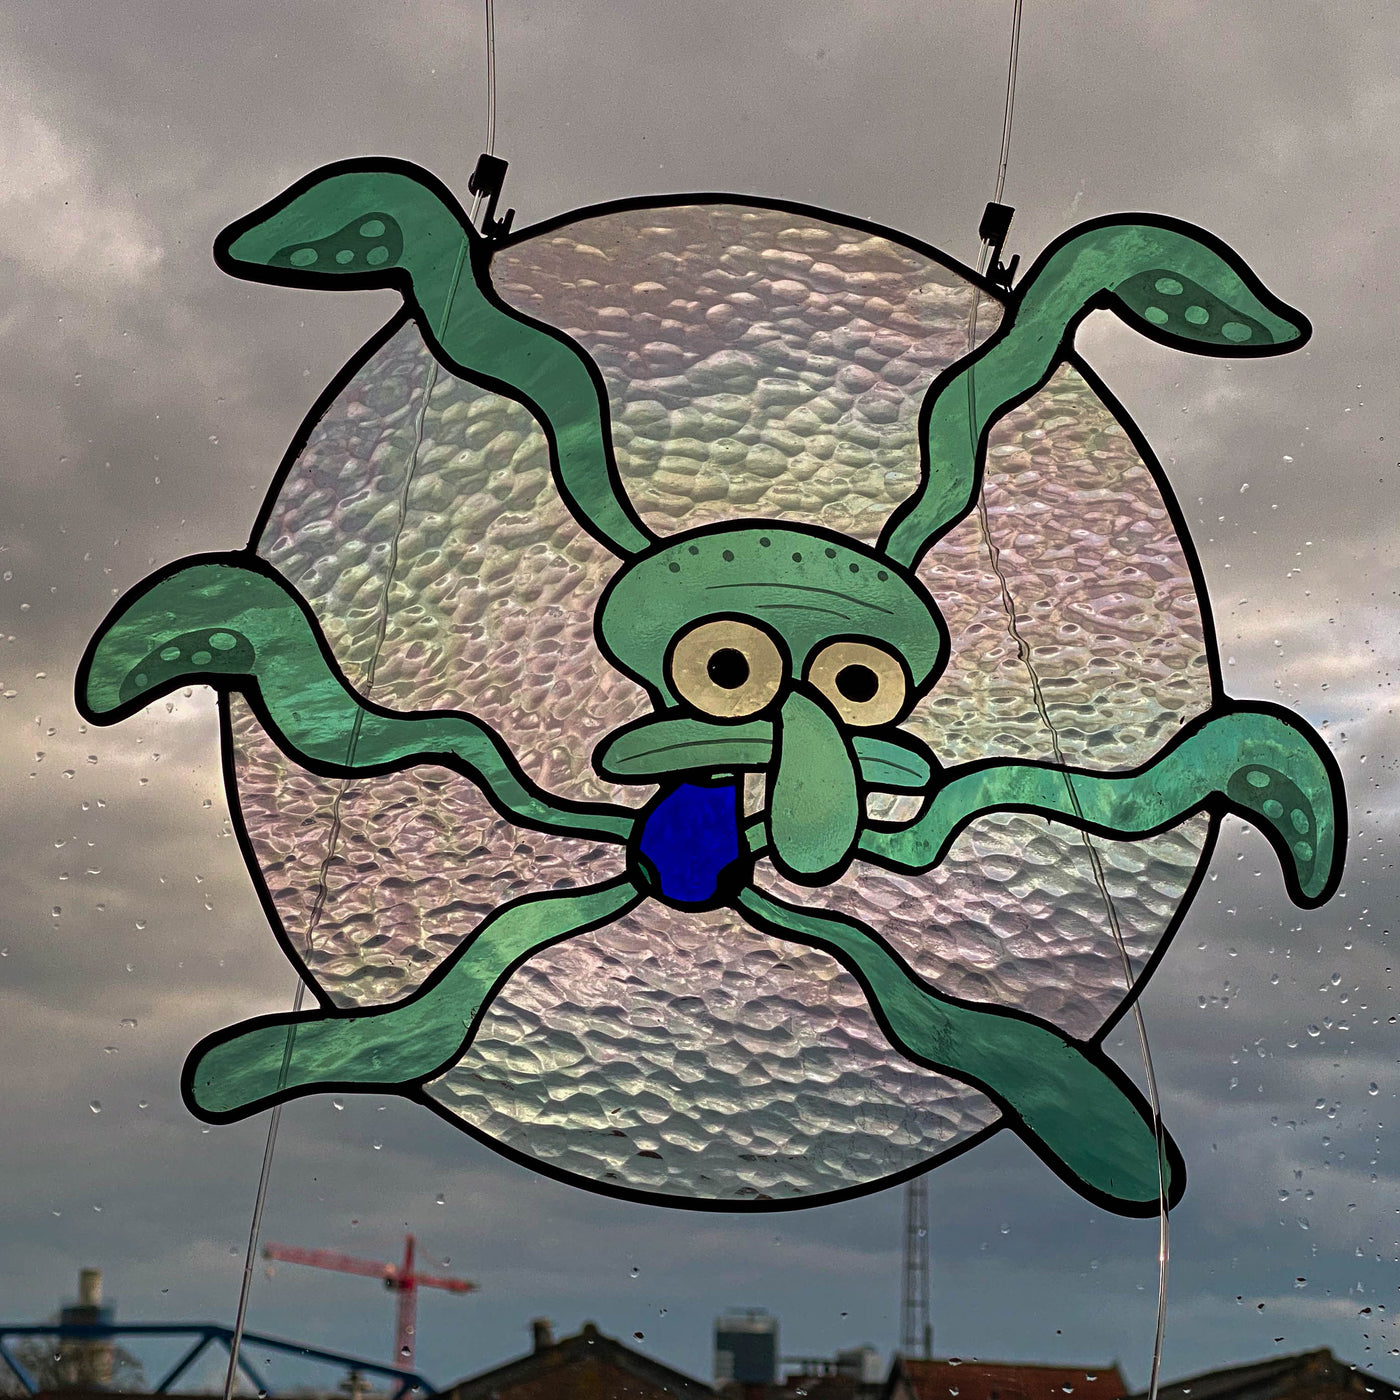 Dancing Squidward Inspired Stained Glass Pattern